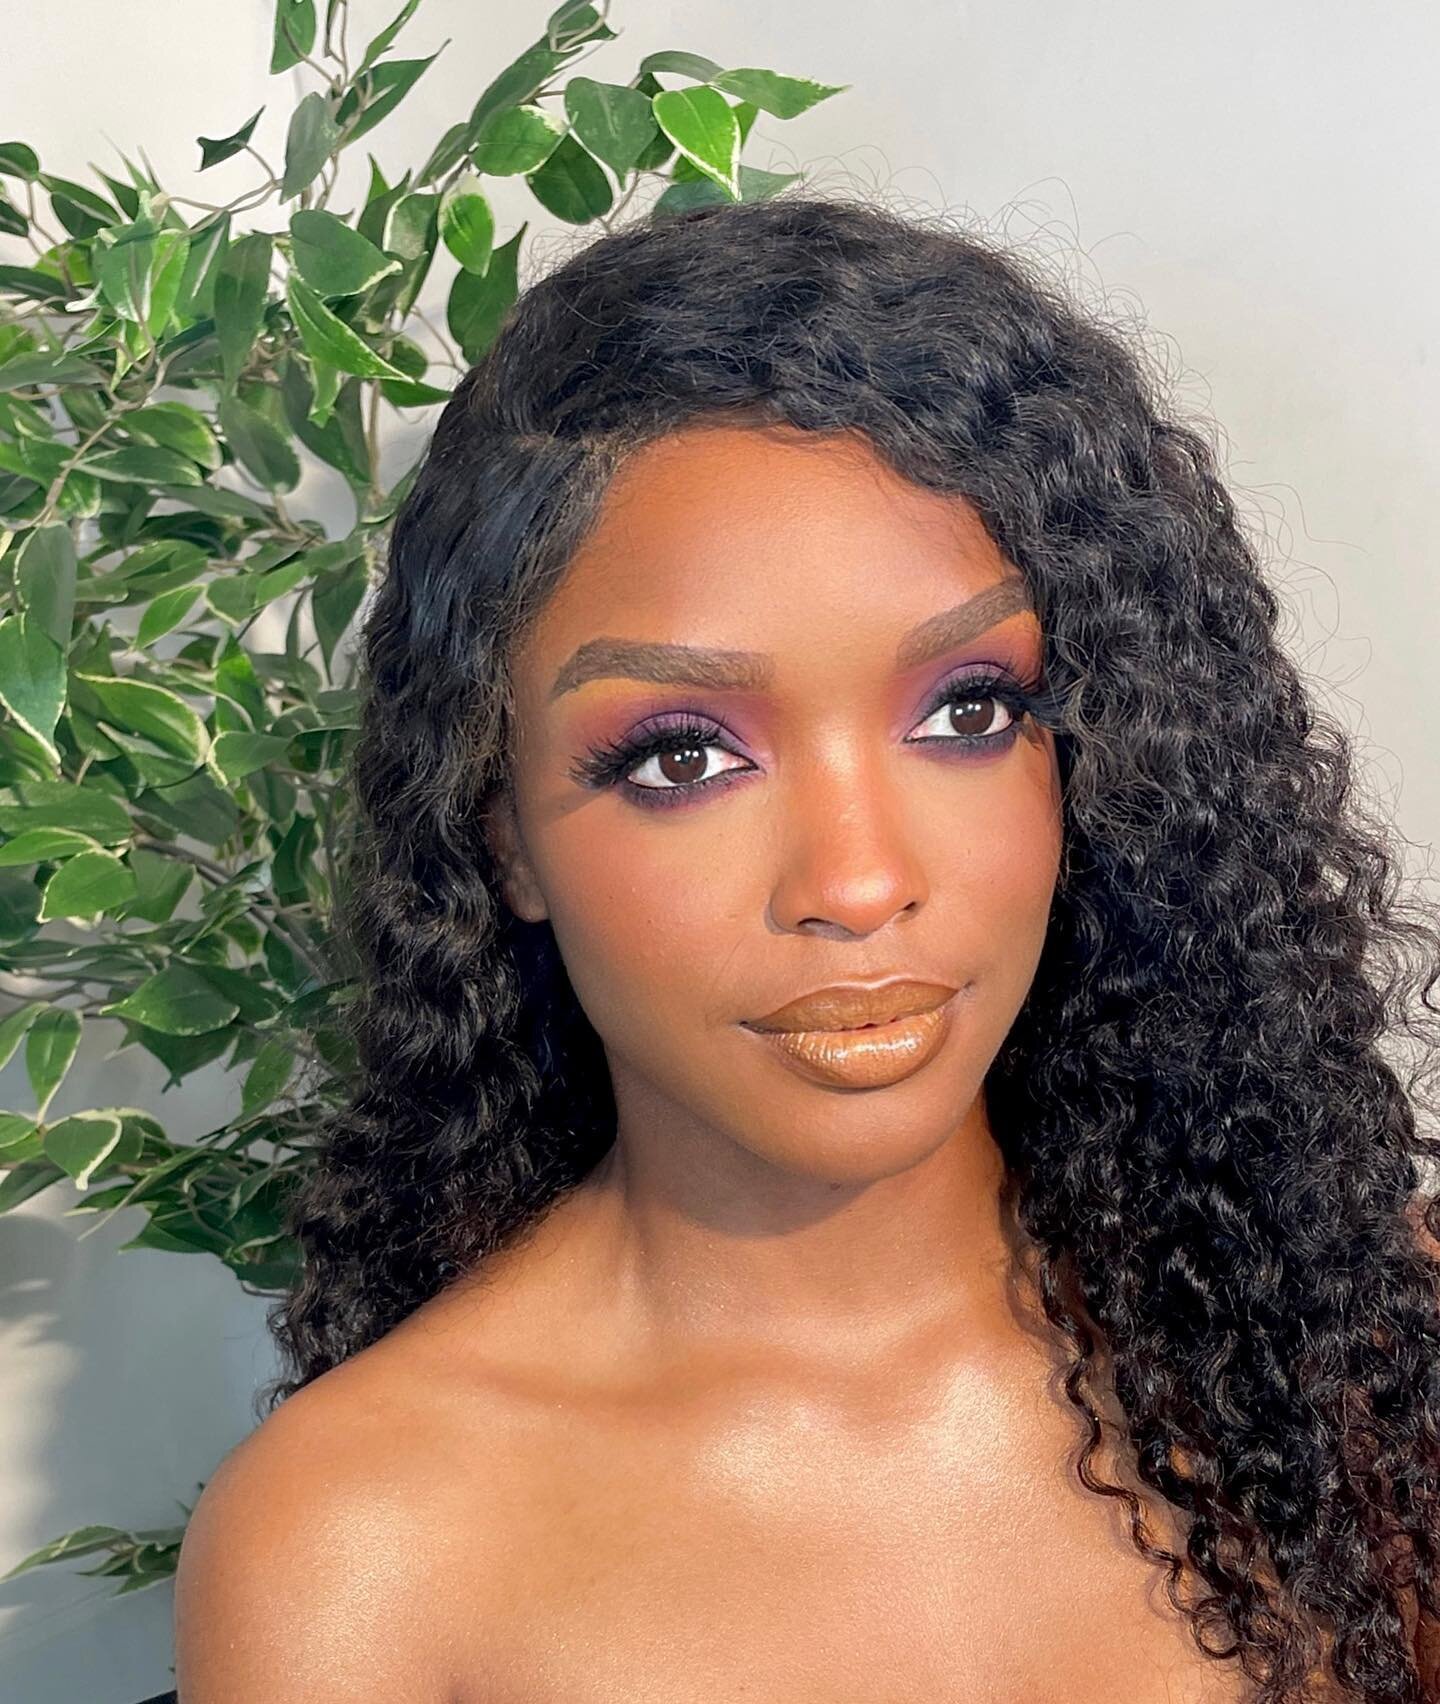 Y V I E
&bull;
&bull;
&bull;
Have you seen this transformation reel? I&rsquo;m really not over it.  The purple eyes, the skin, the flawless real life glam. 😫
&bull;
&bull;
&bull;
&bull;
&bull;
#shadesofradiancebeauty #dmvmakeupartist #dmvmua #dcmake